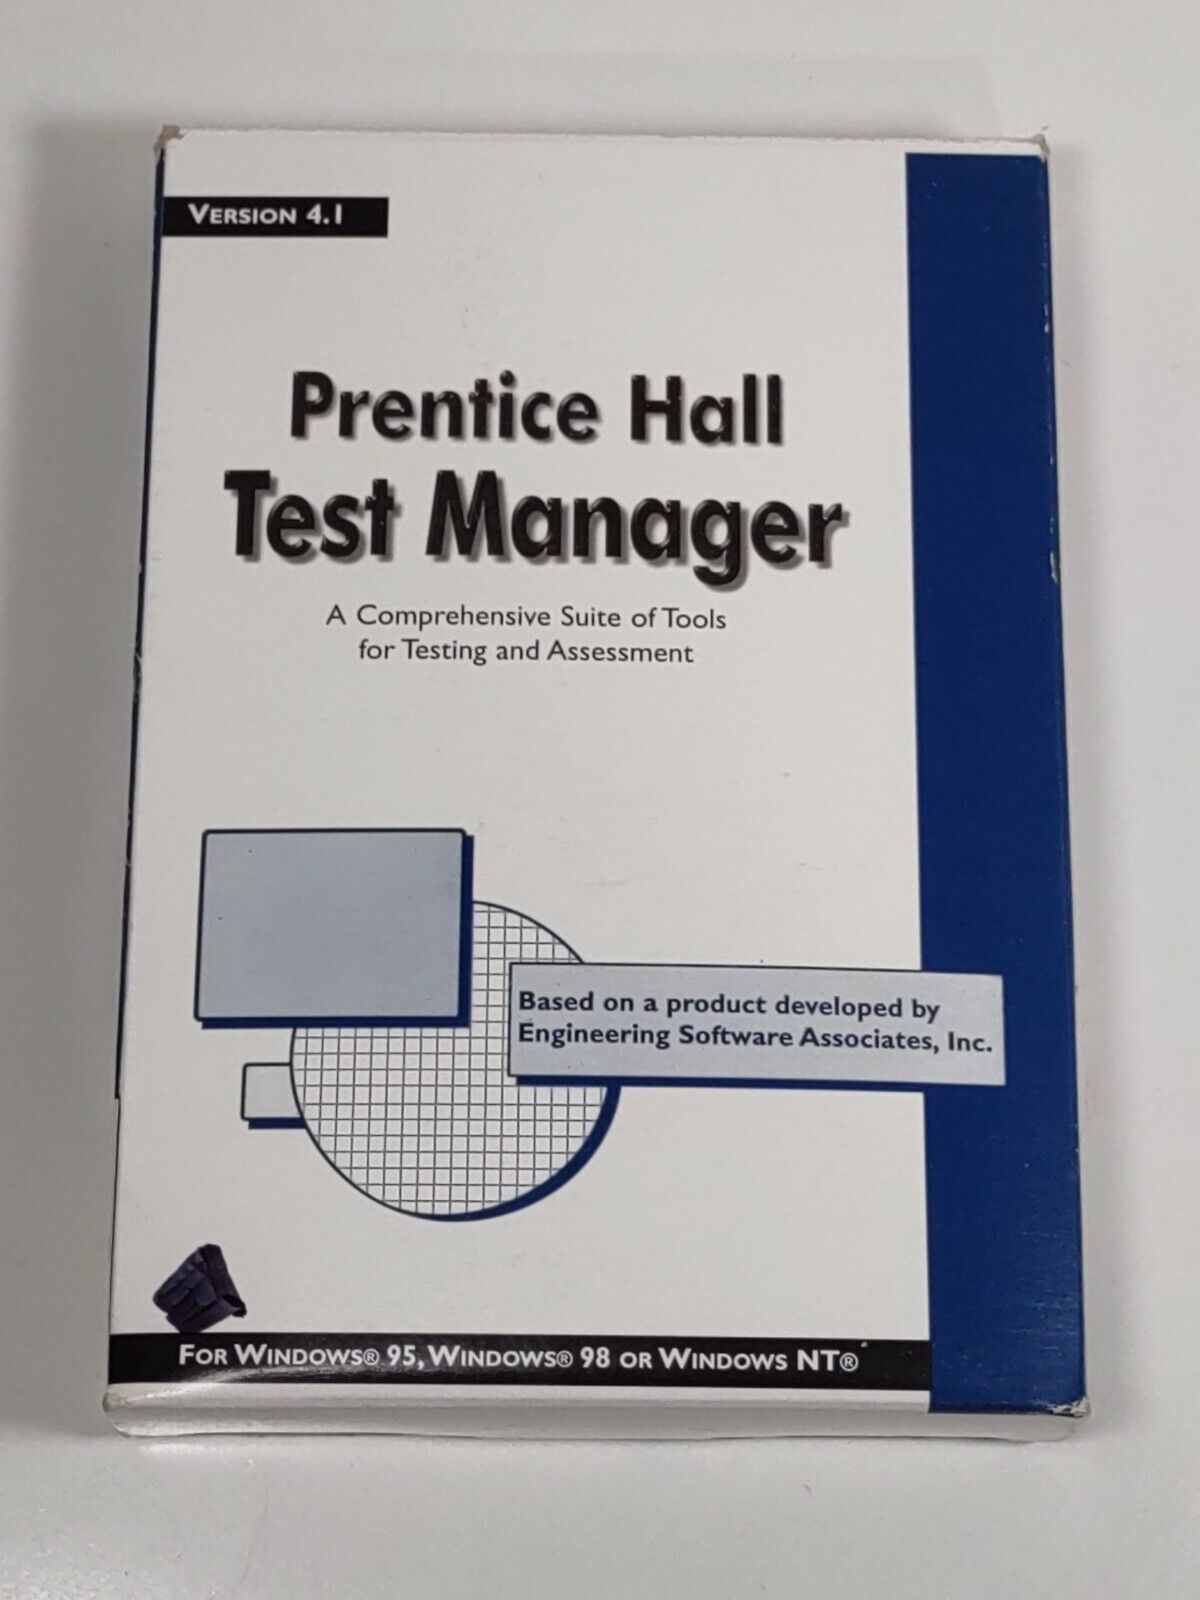 Prentice Hall Test Manager Suite Of Tools For Testing Assessment Version 4.1 